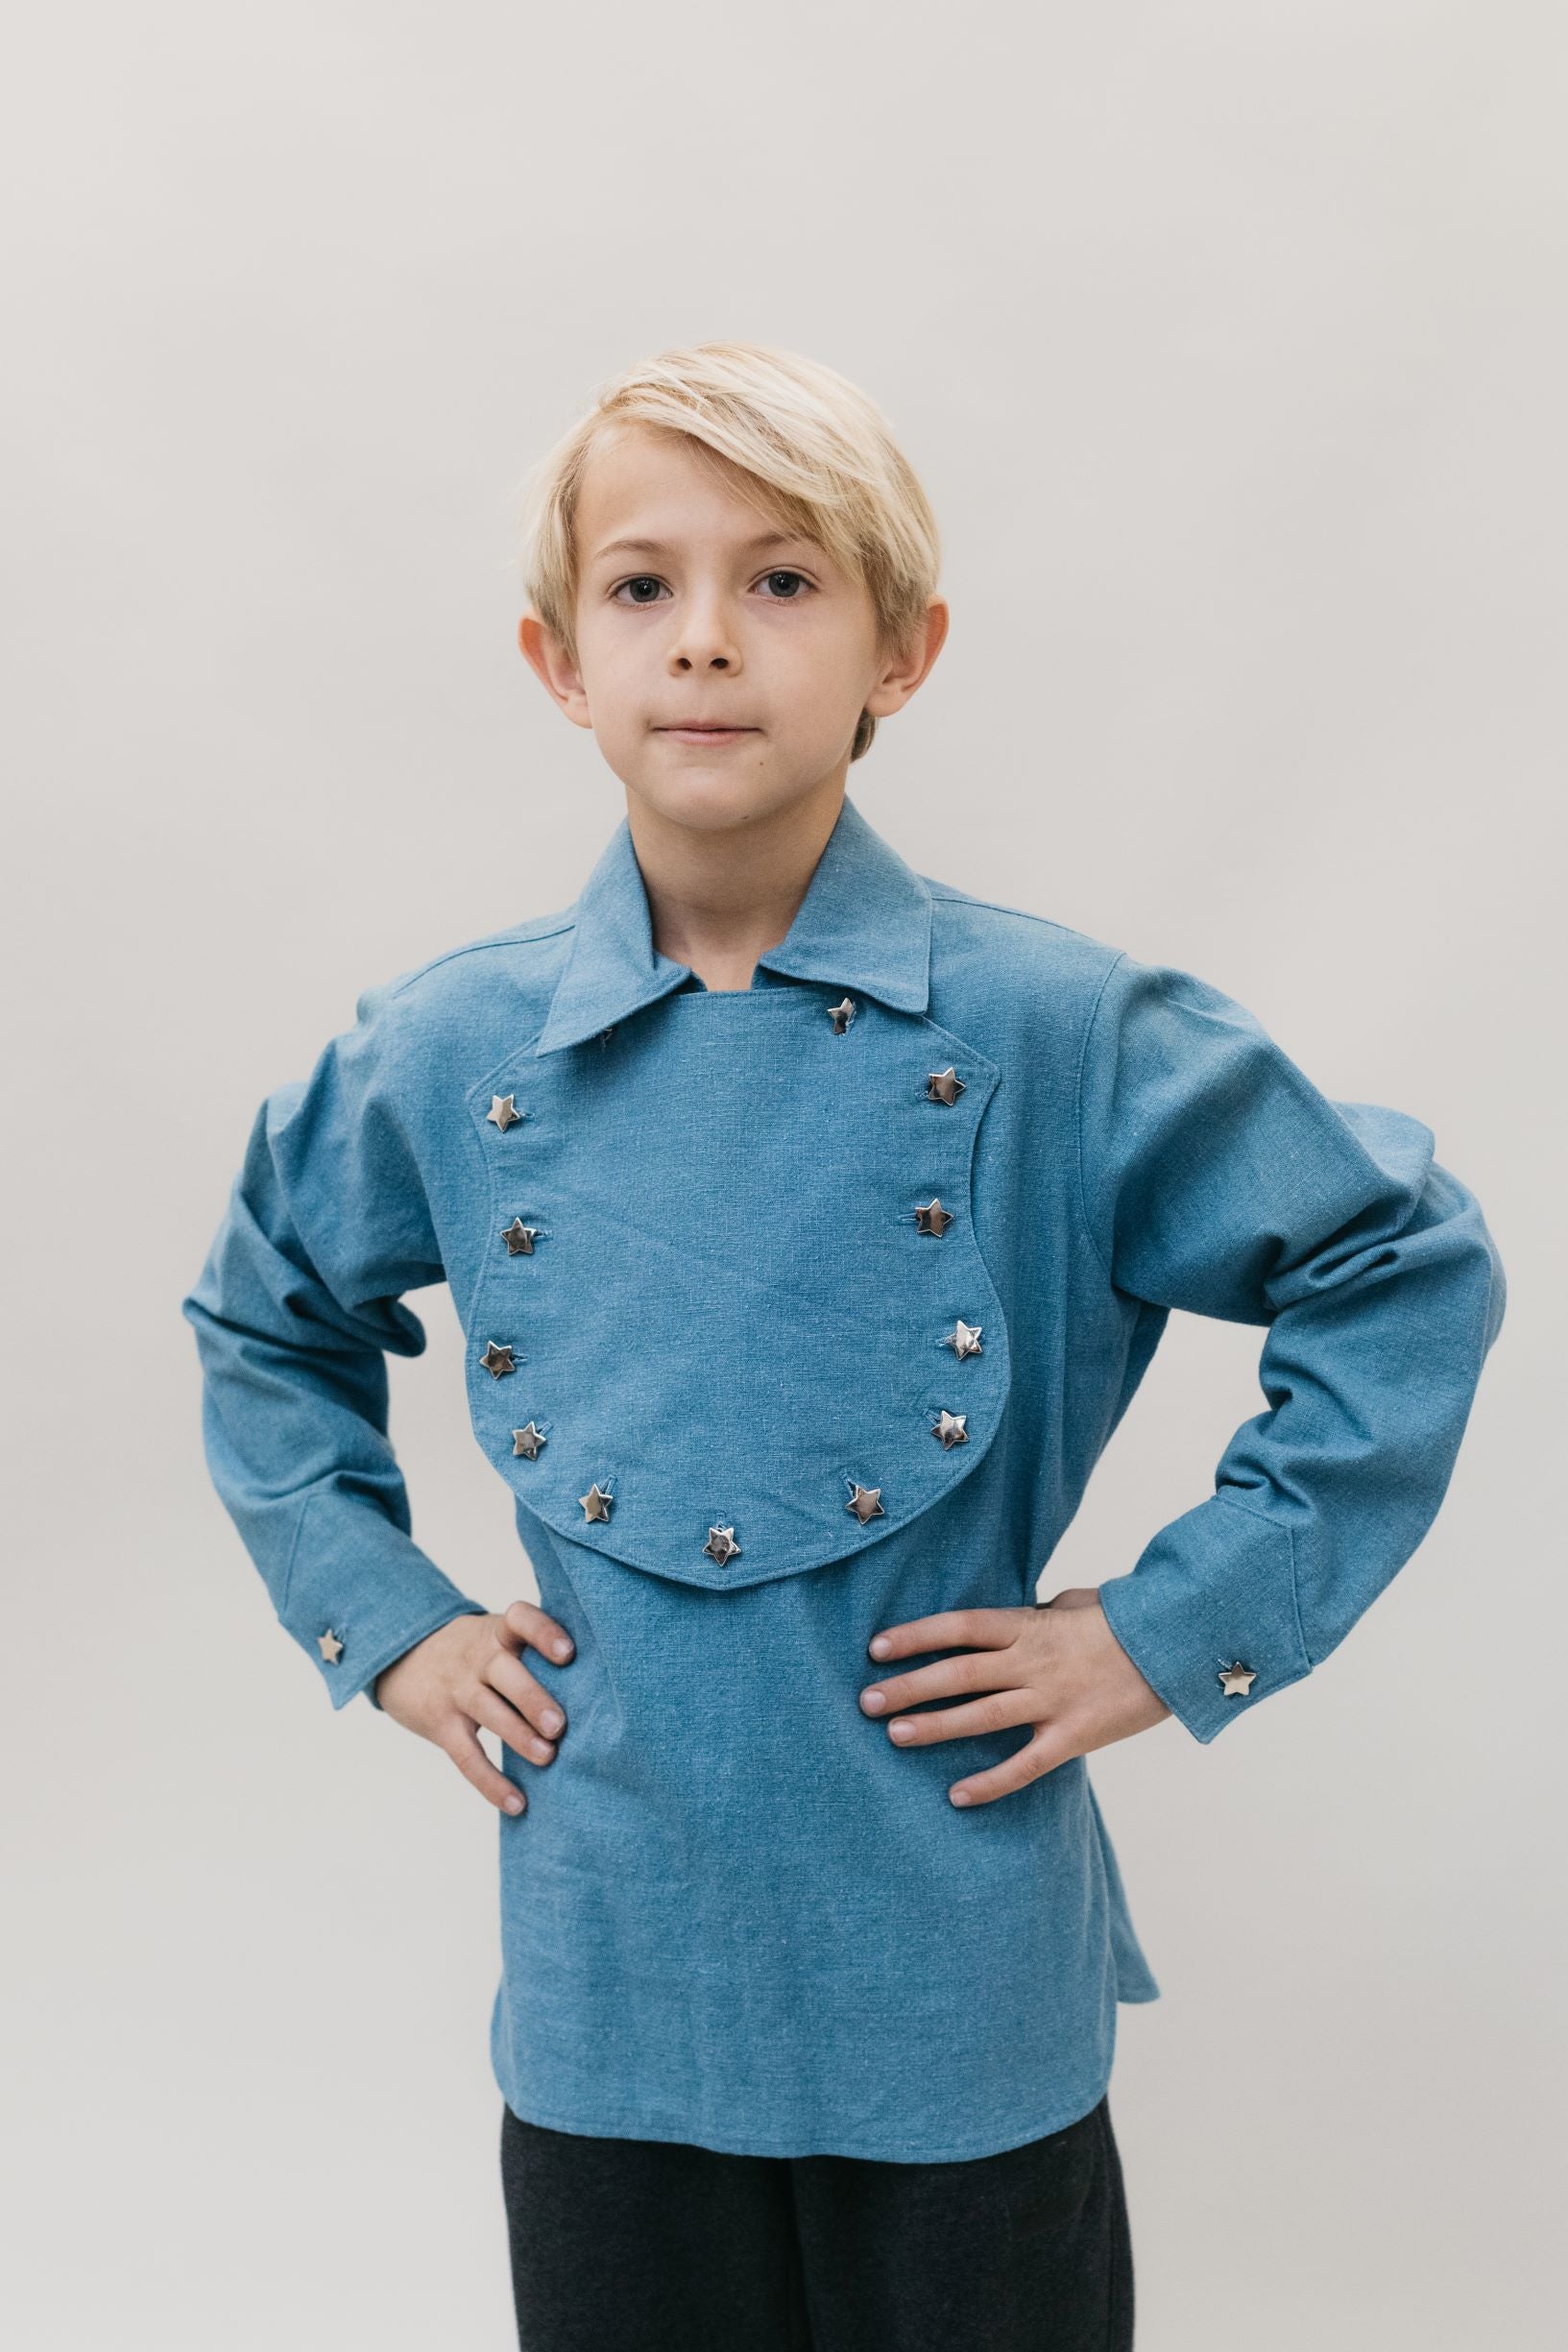 Small Blonde child with hands on his hips standing in front of a white studio backdrop, wearing 218 Child's Frontier Shirt View C Fireman's bib. 